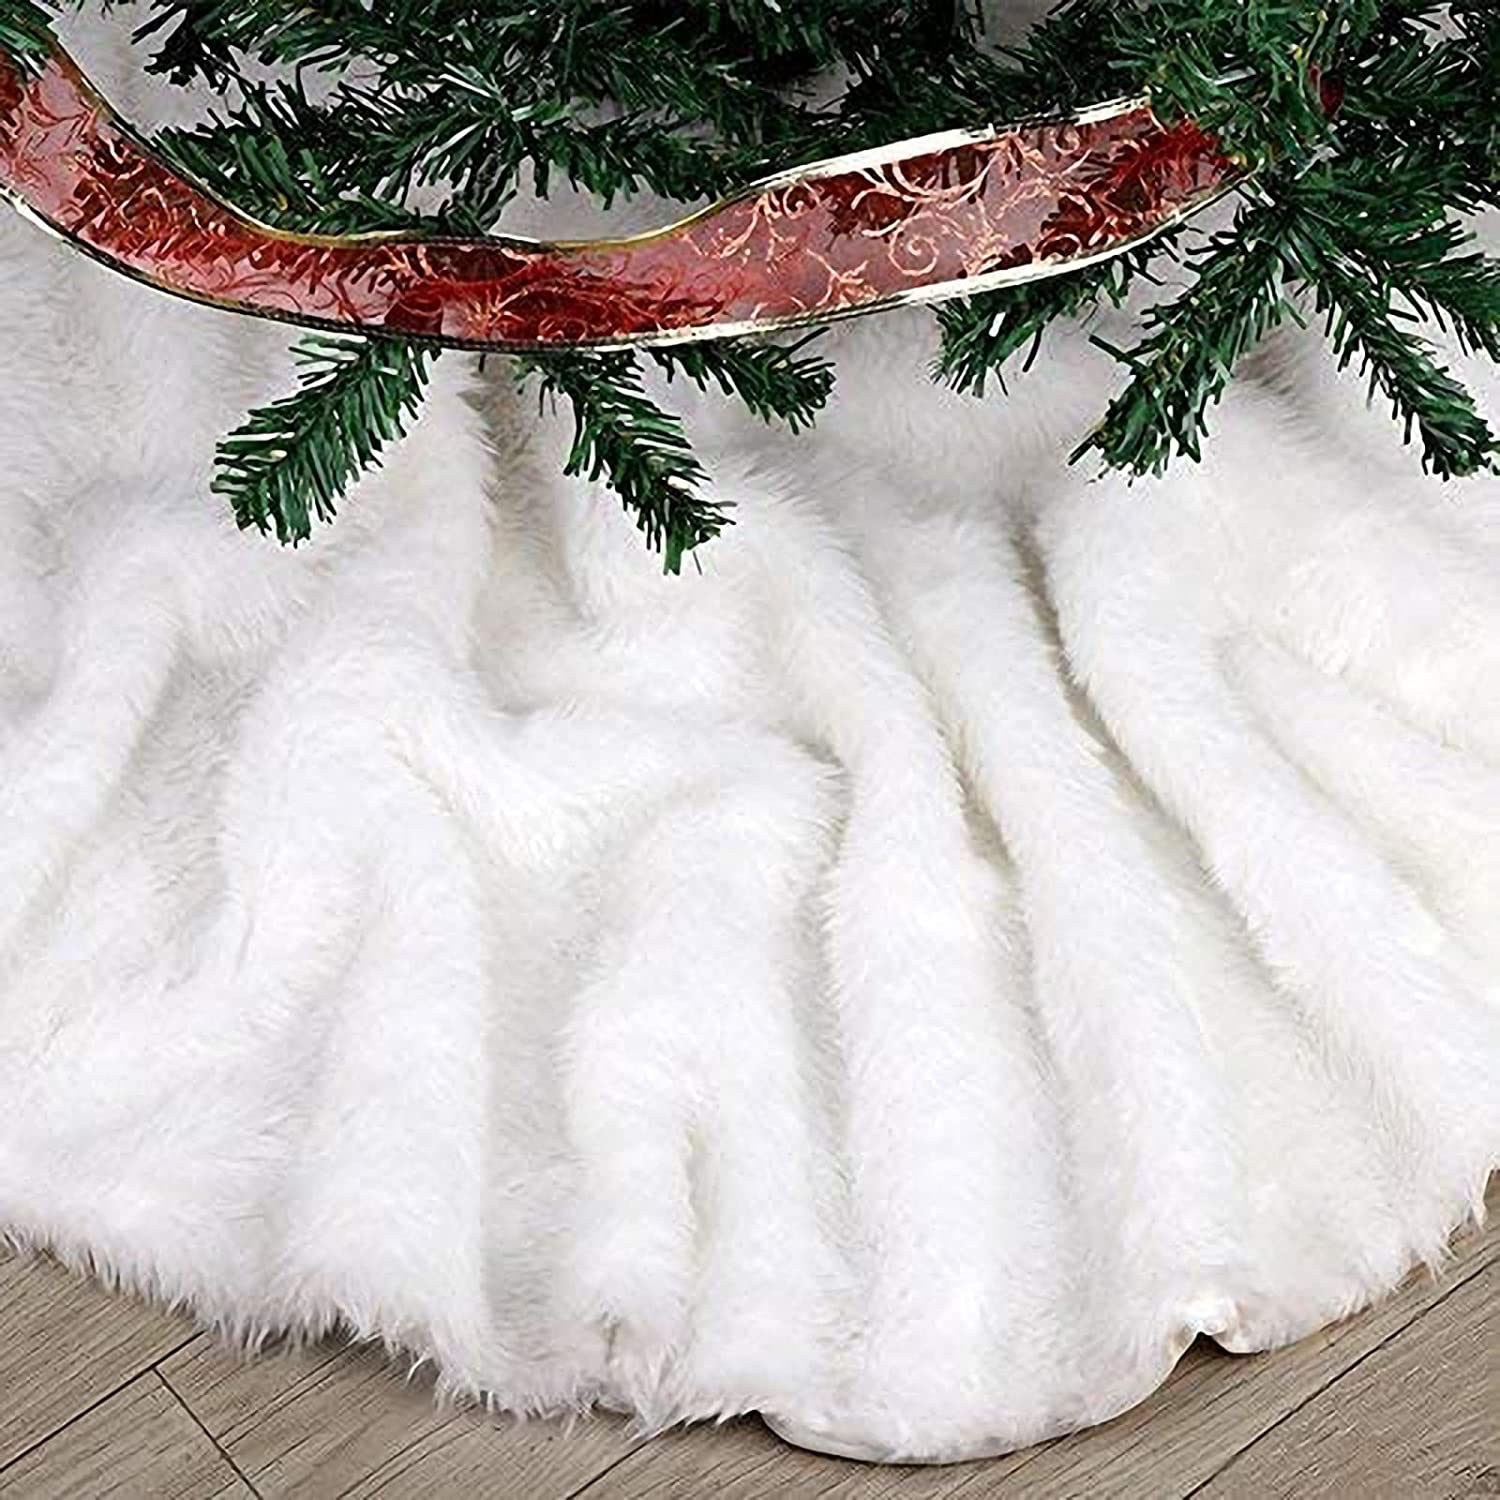 Rechoo Christmas Tree Skirt 31 Inches Pure White Faux Fur Tree Skirt for Merry Christmas & New Year Party Xmas Holiday Home Decorations 